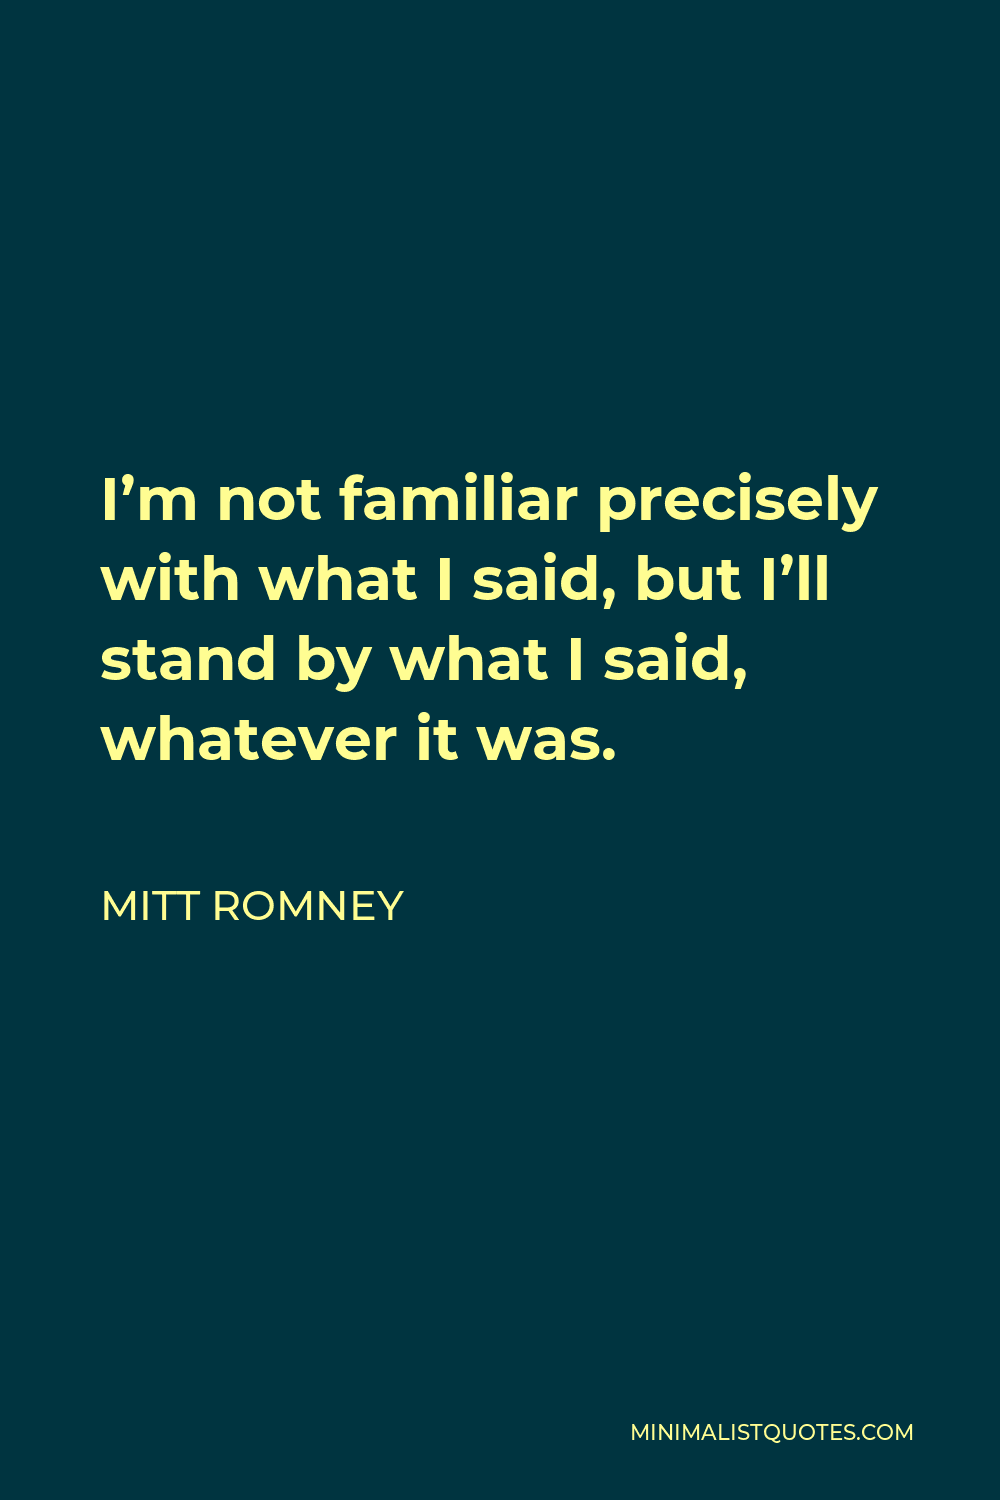 Mitt Romney Quote - I’m not familiar precisely with what I said, but I’ll stand by what I said, whatever it was.